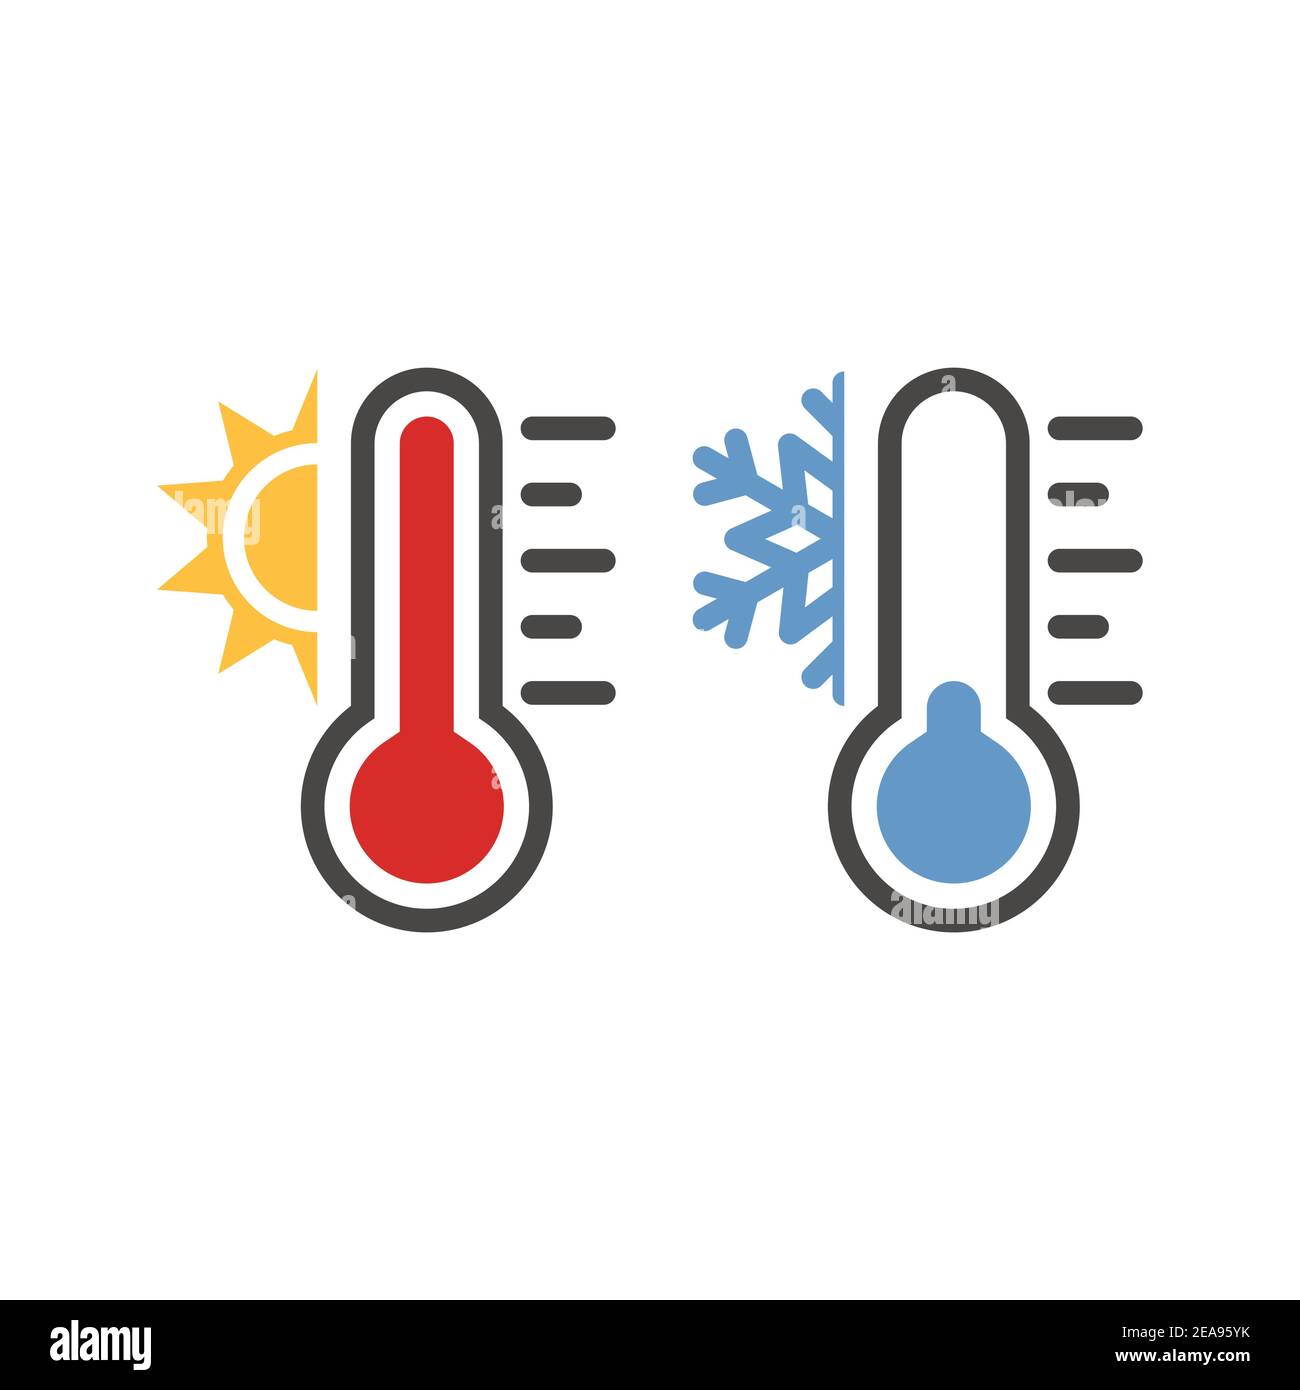 https://c8.alamy.com/comp/2EA95YK/thermometer-with-sun-and-snowflake-icon-set-vector-weather-symbol-set-for-warm-hot-cold-temperature-2EA95YK.jpg